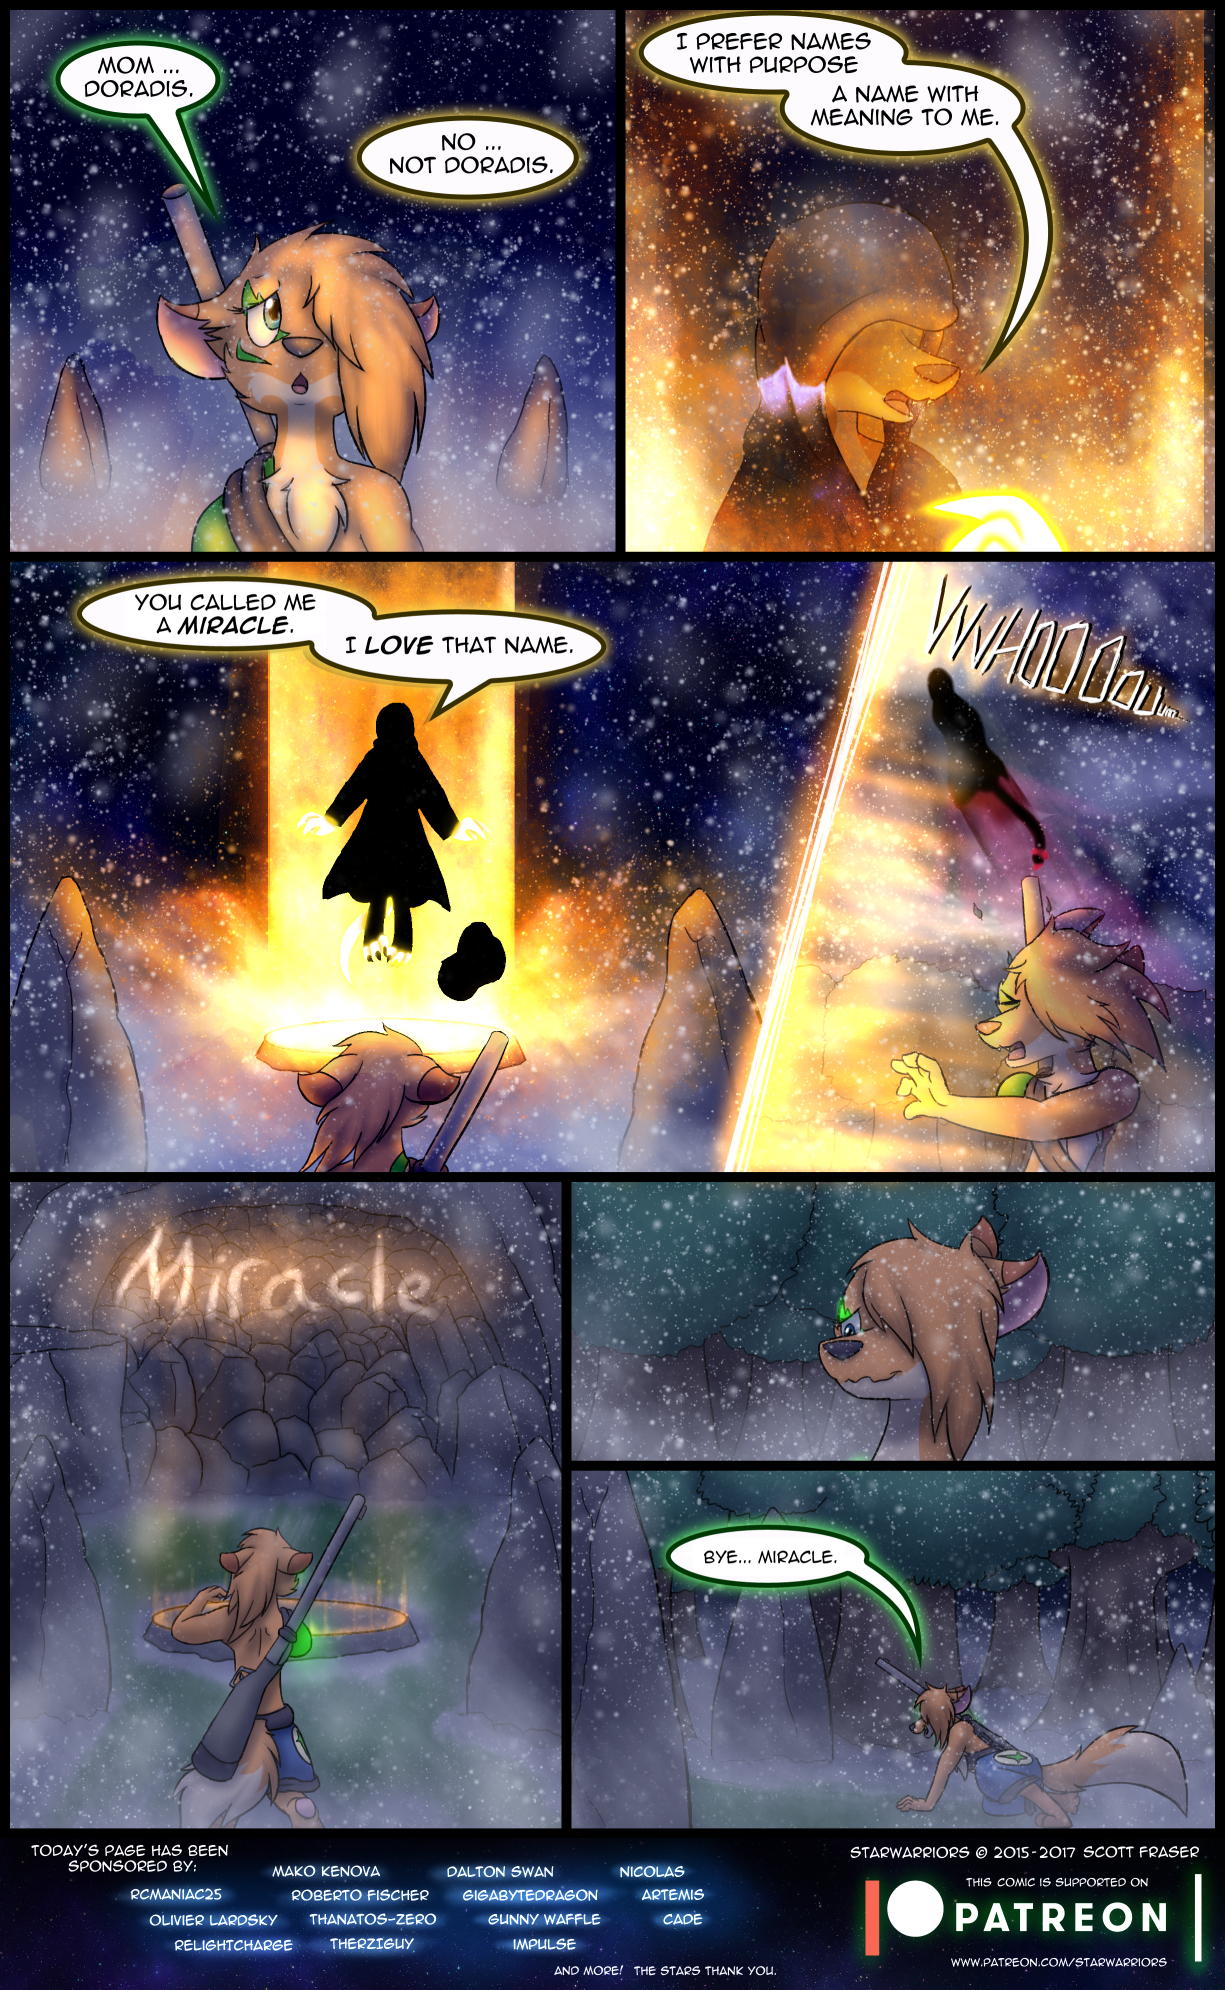 Ch3 Page 15 – Miracle